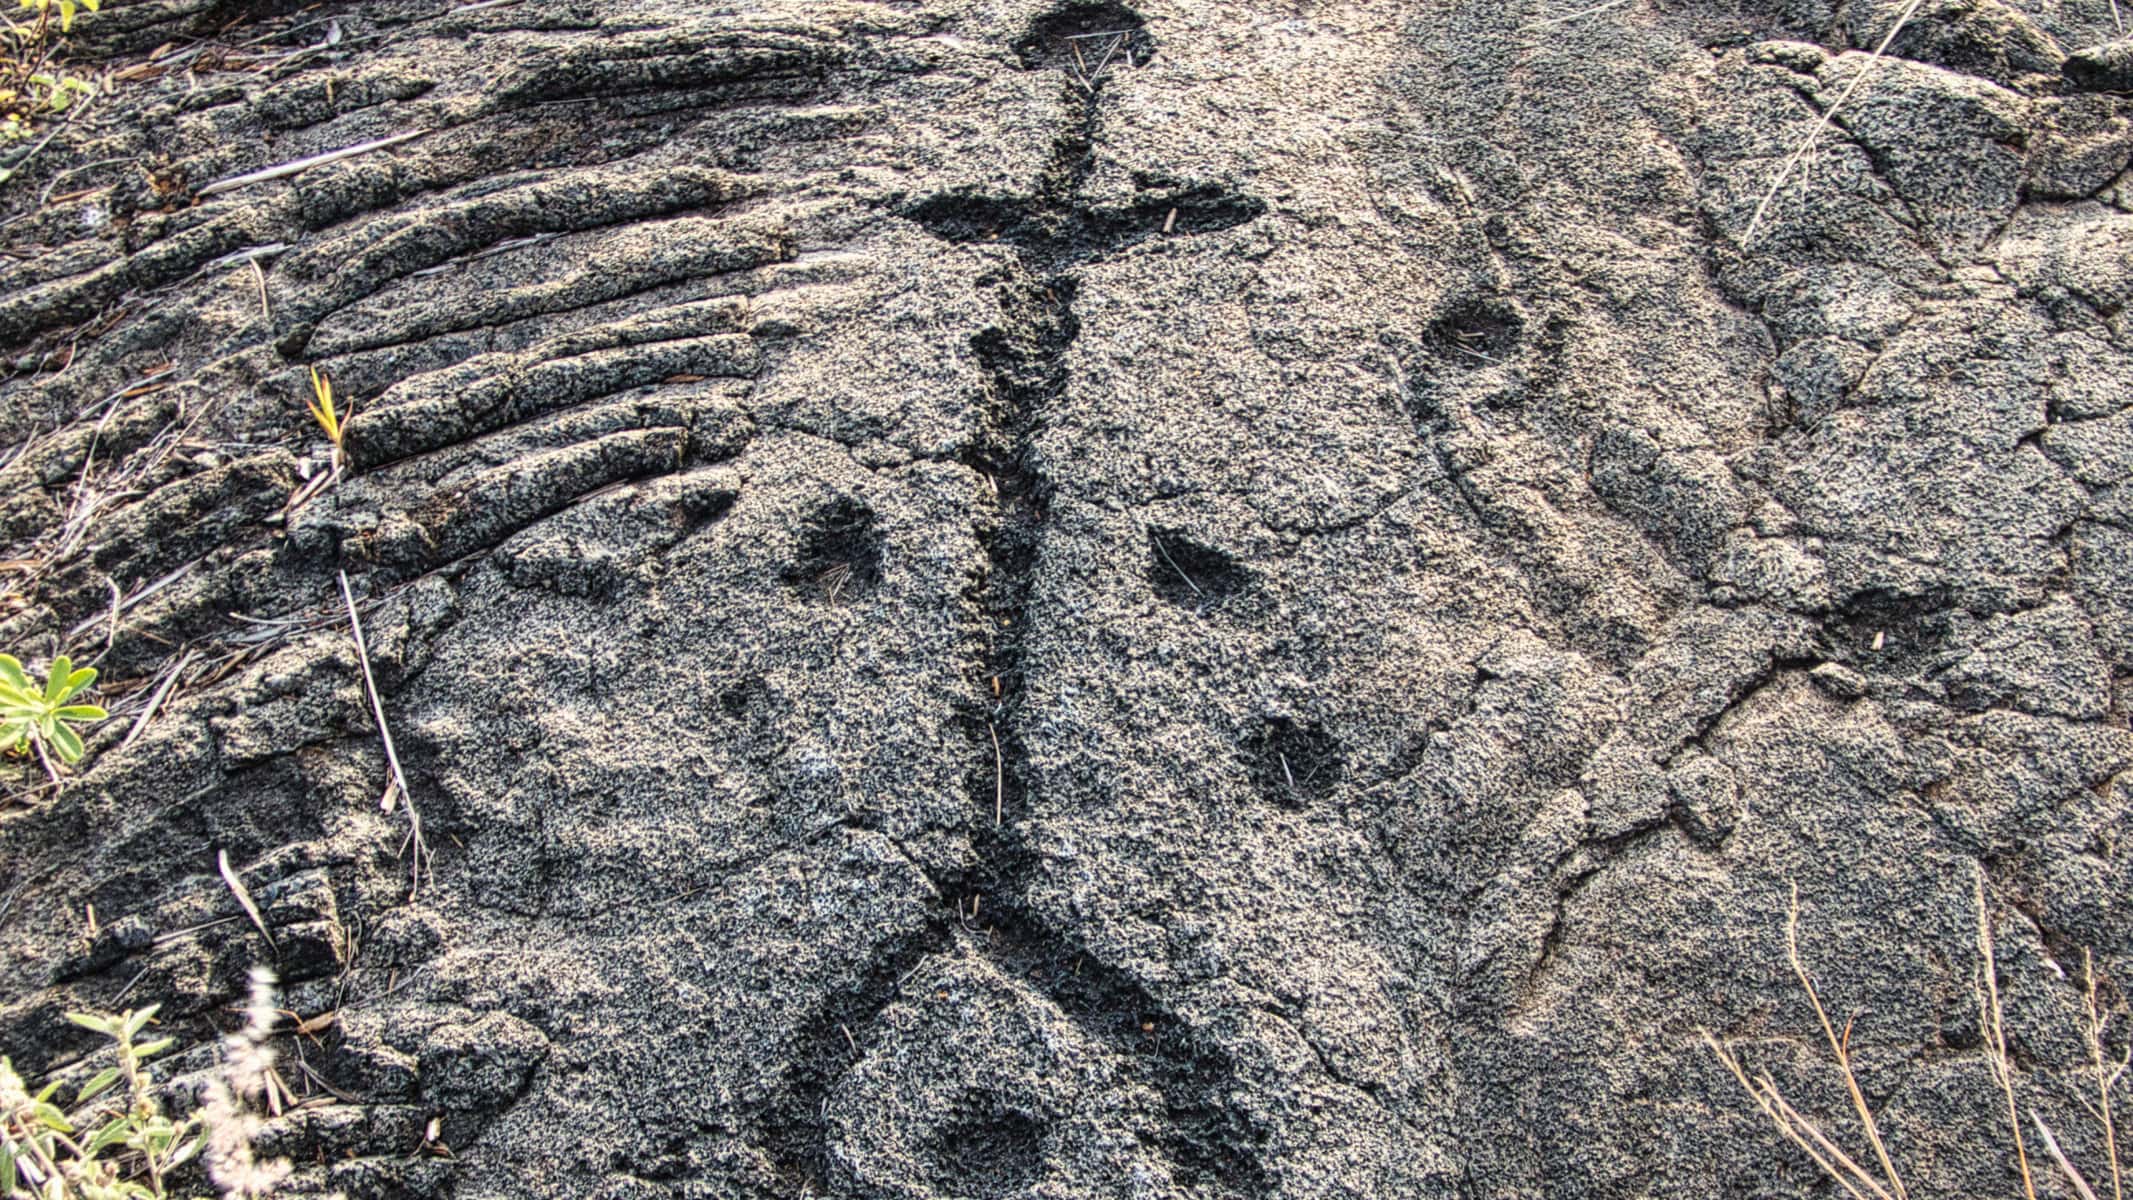 Native Petroglyph - Looks Like A Guy Running From Lava Bombs To Me...